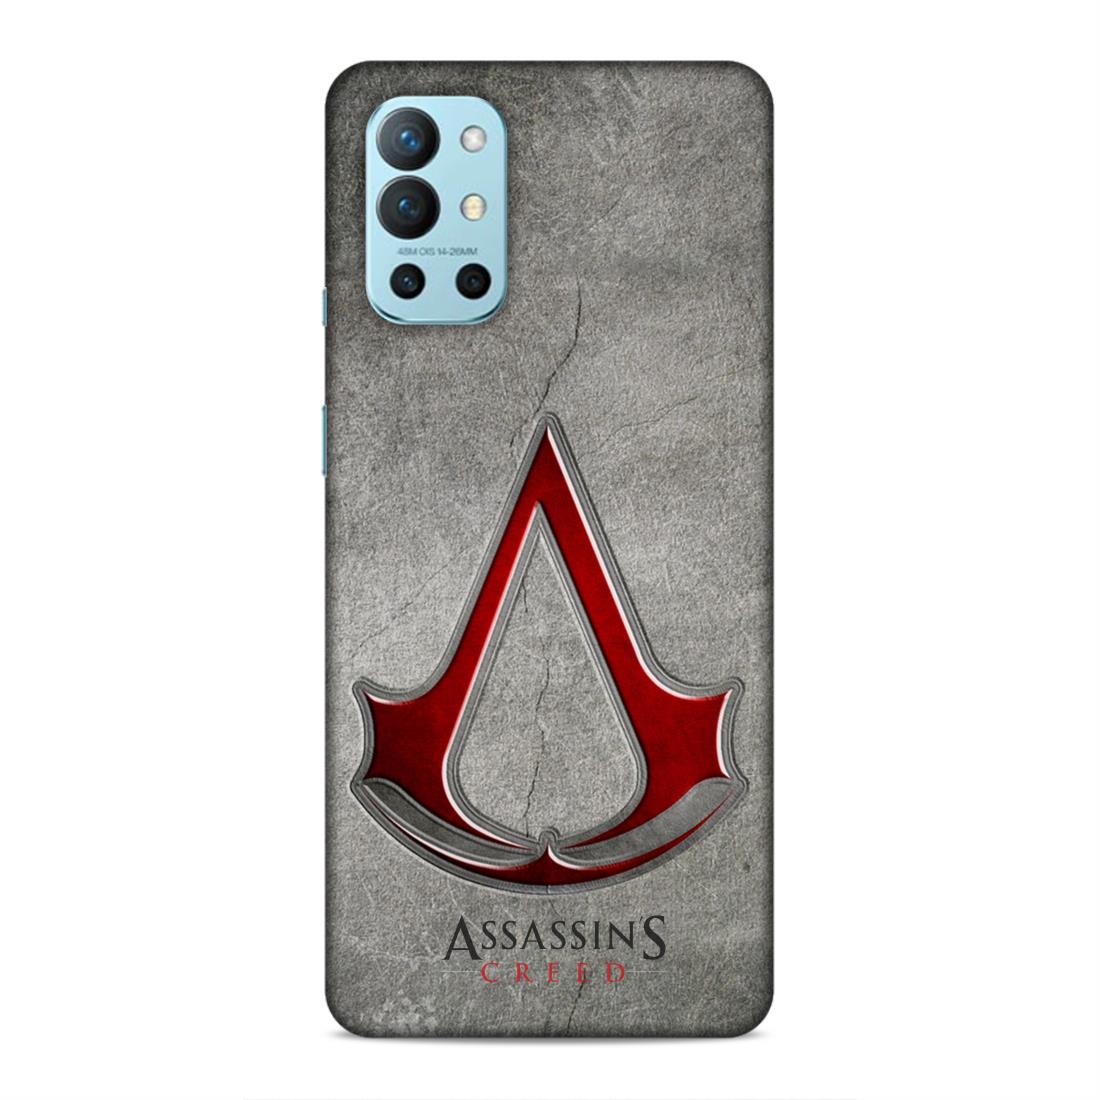 Assassin's Creed Hard Back Case For OnePlus 8T / 9R